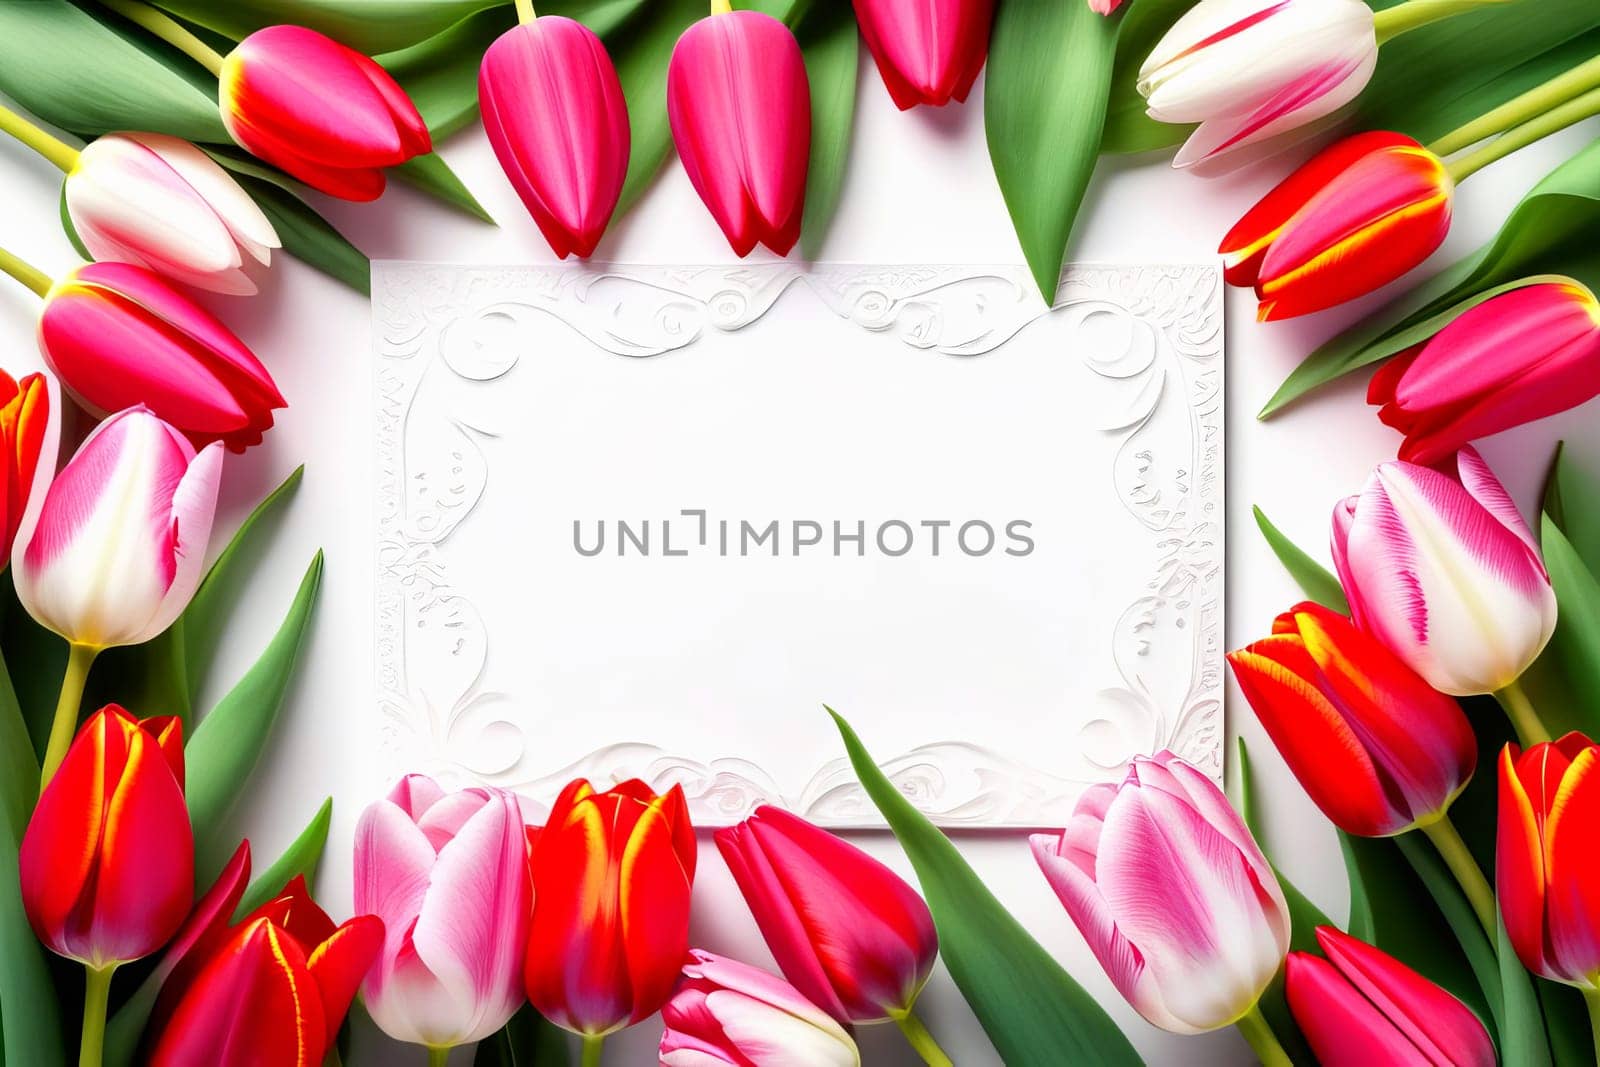 Women's Day card, a frame of pink and red tulips. by OlgaGubskaya